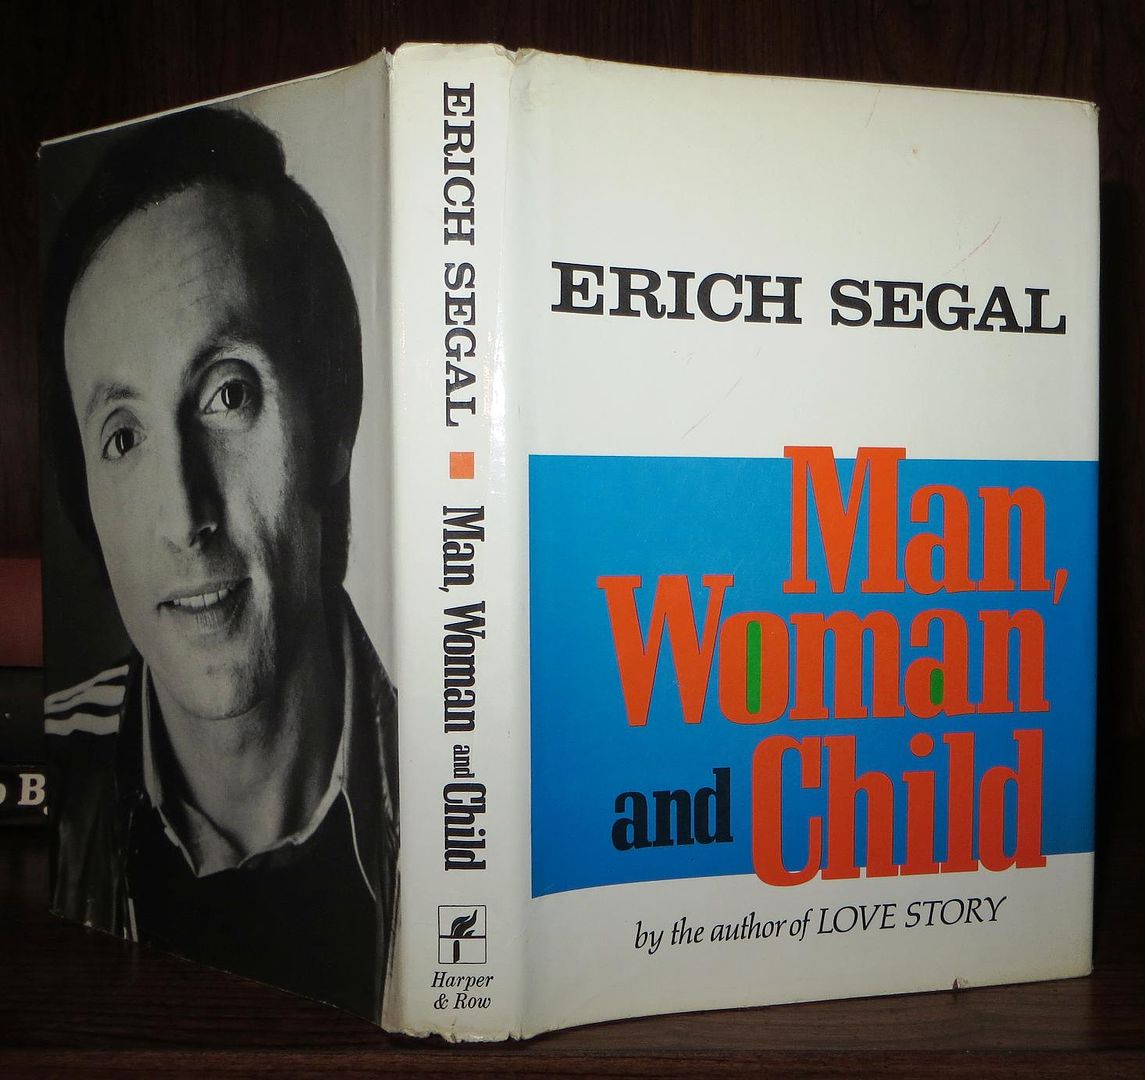 SEGAL, ERICH - Man Woman and Child